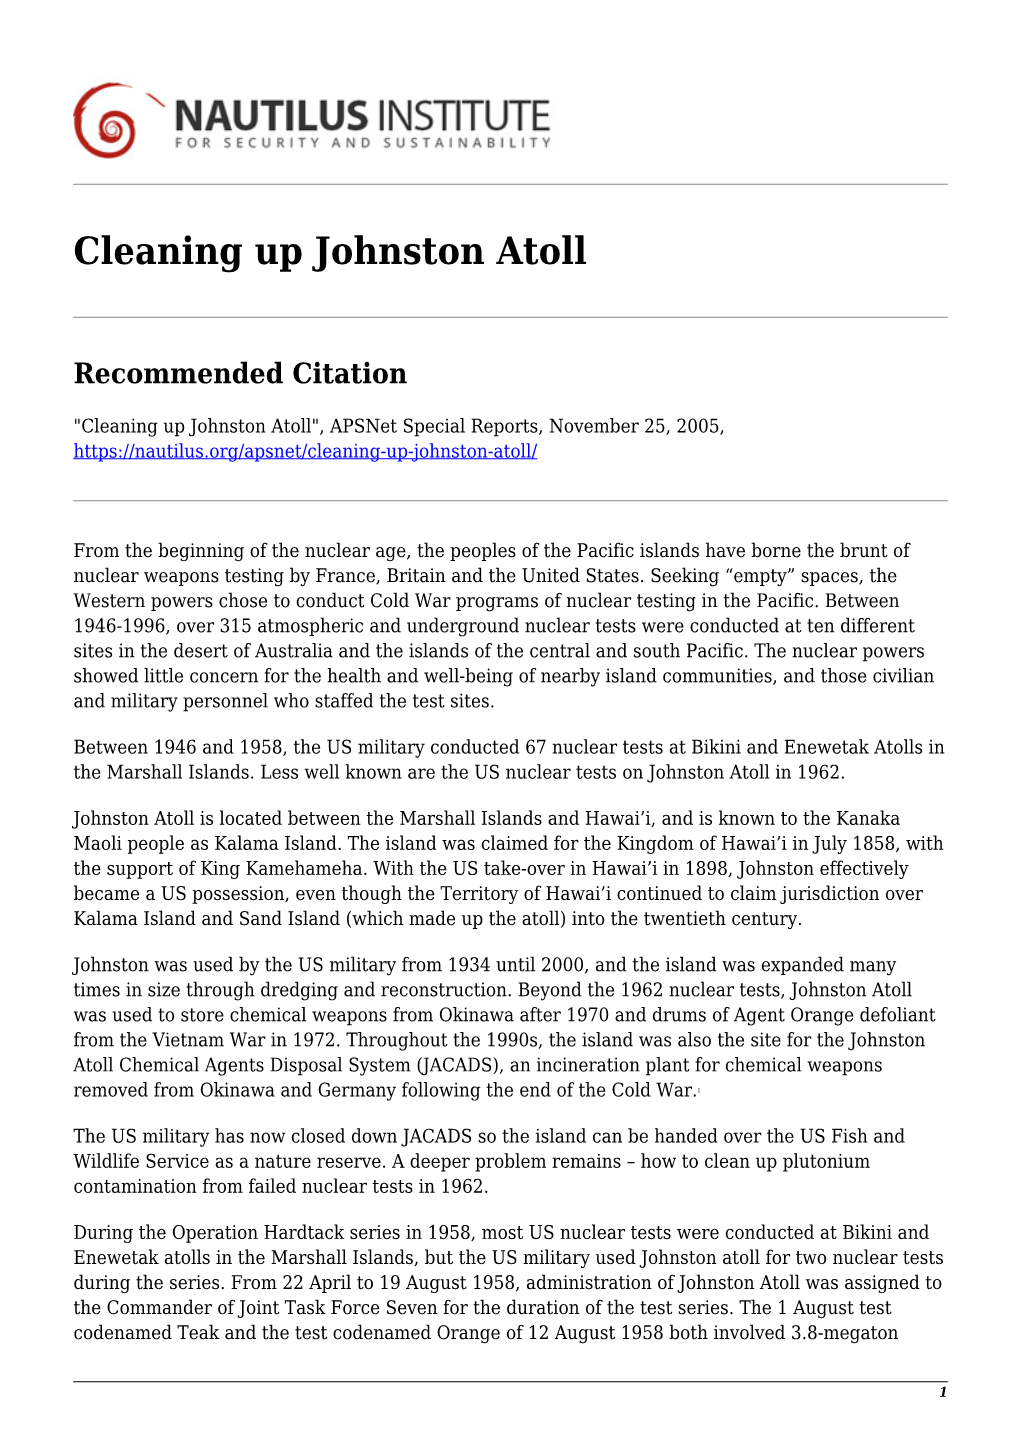 Cleaning up Johnston Atoll